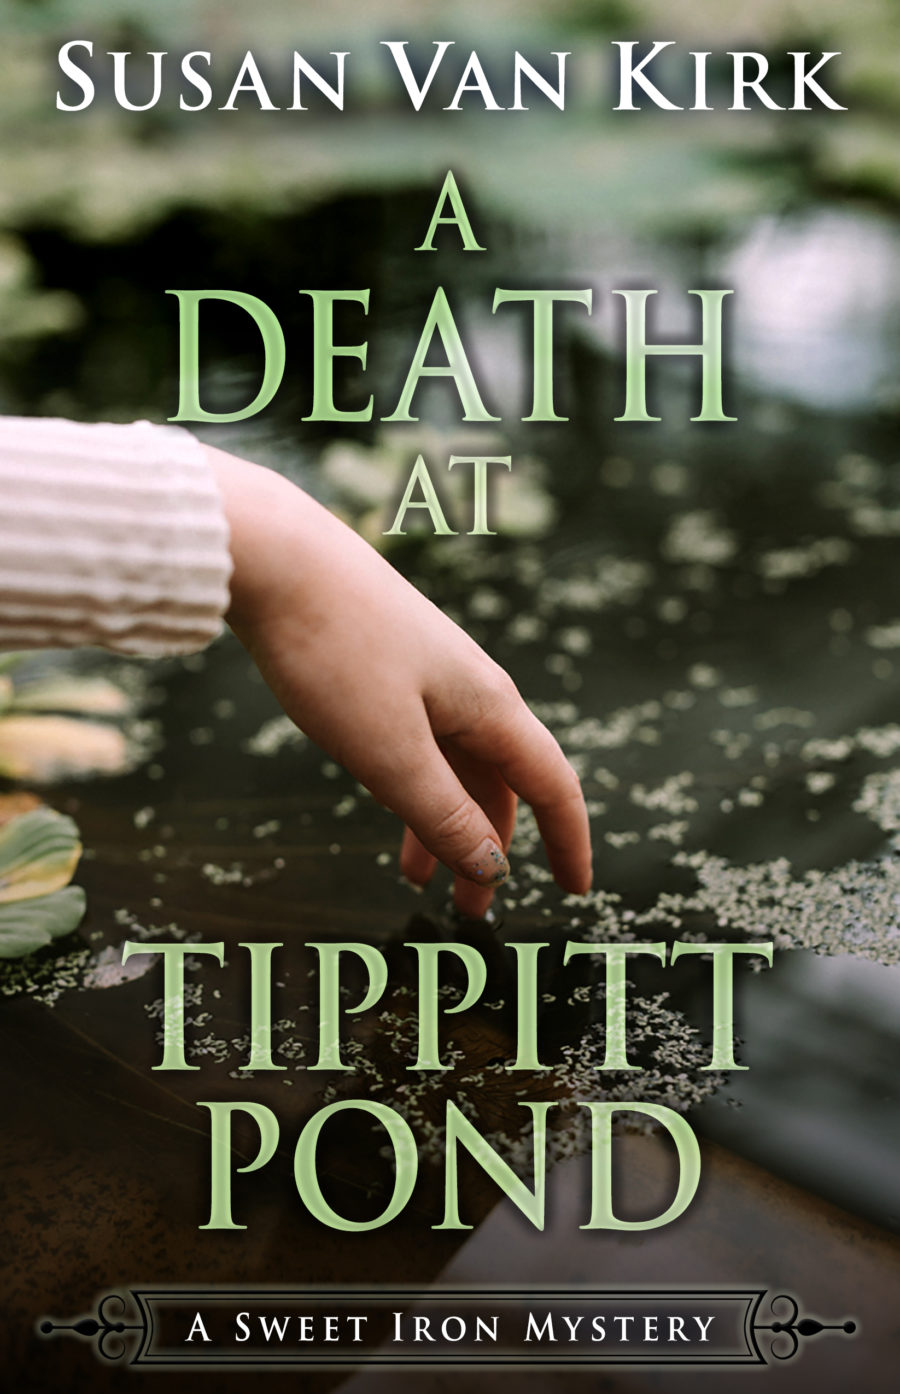 Cover of the book "Death at Tippitt Pond" showing a lifeless hand dangling in a pond.